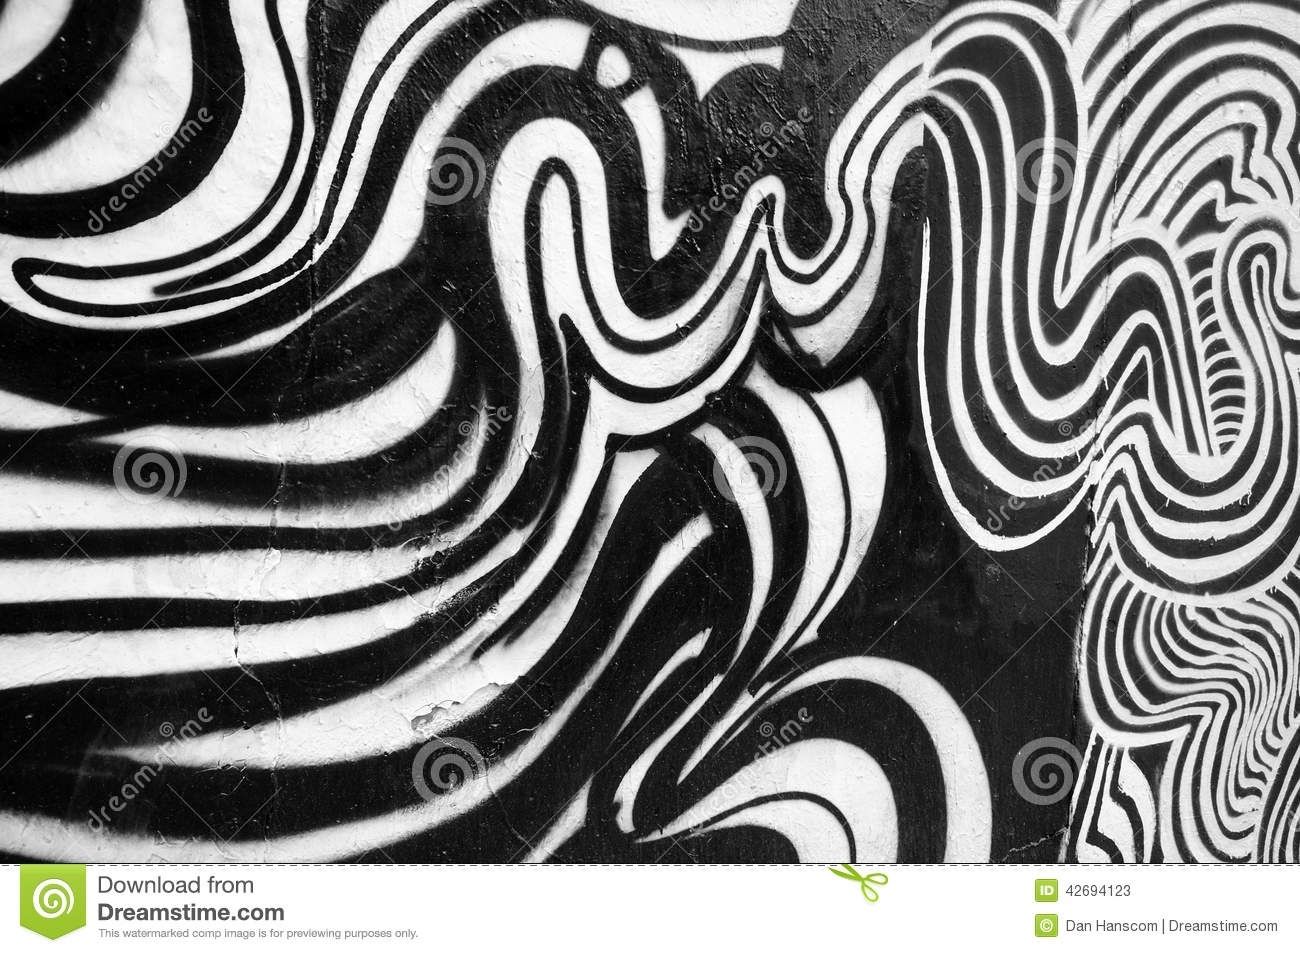 Black And White Graffiti Wall Art Black And White Abstract Throughout Most Recently Released Black And White Abstract Wall Art (Gallery 20 of 20)